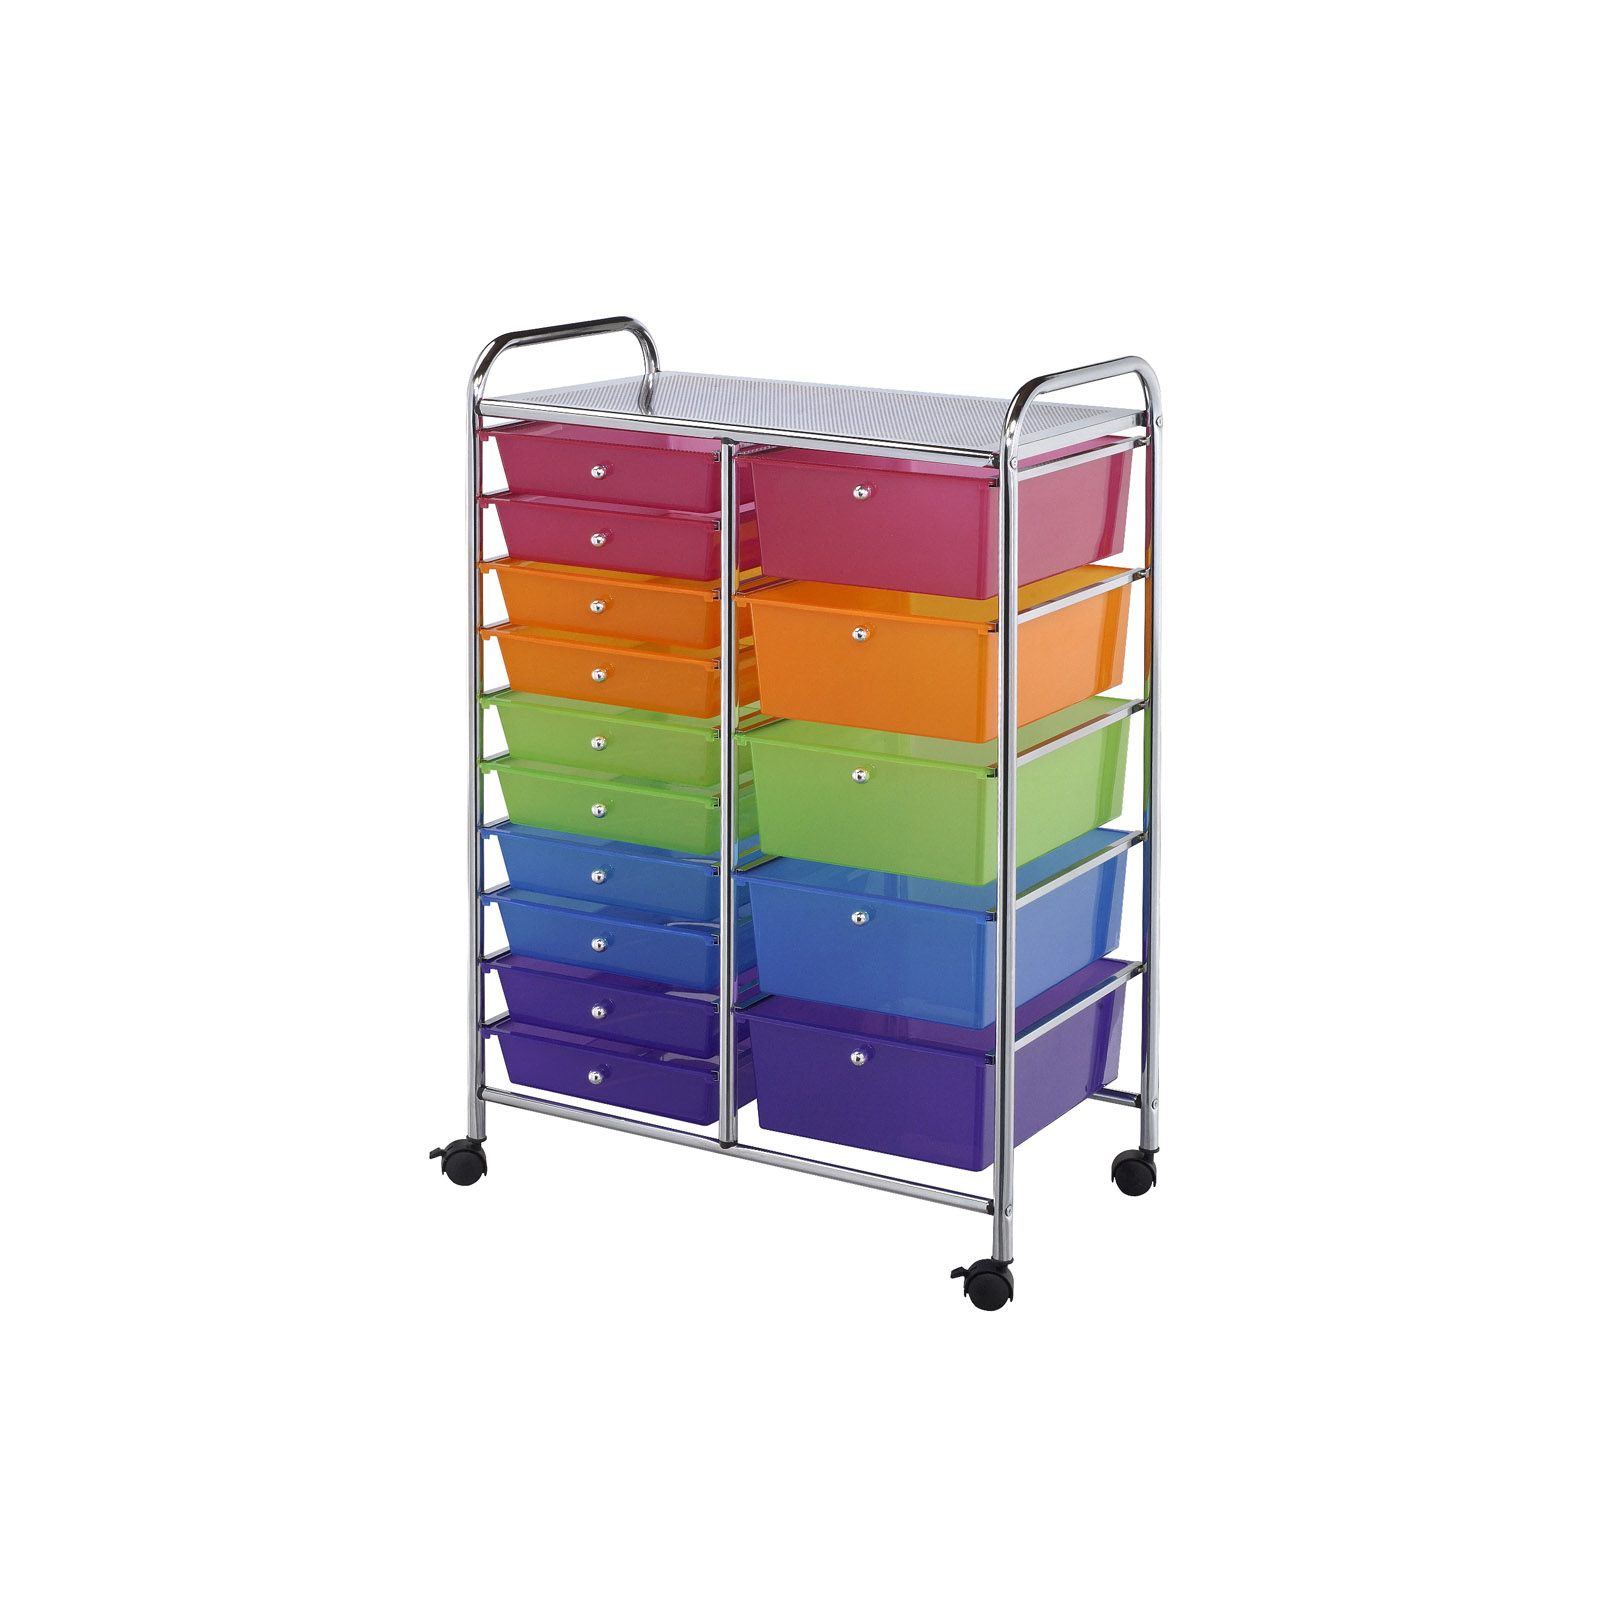 Buy the Darice® Rolling Craft Storage Cart, 15 Drawers at Michaels